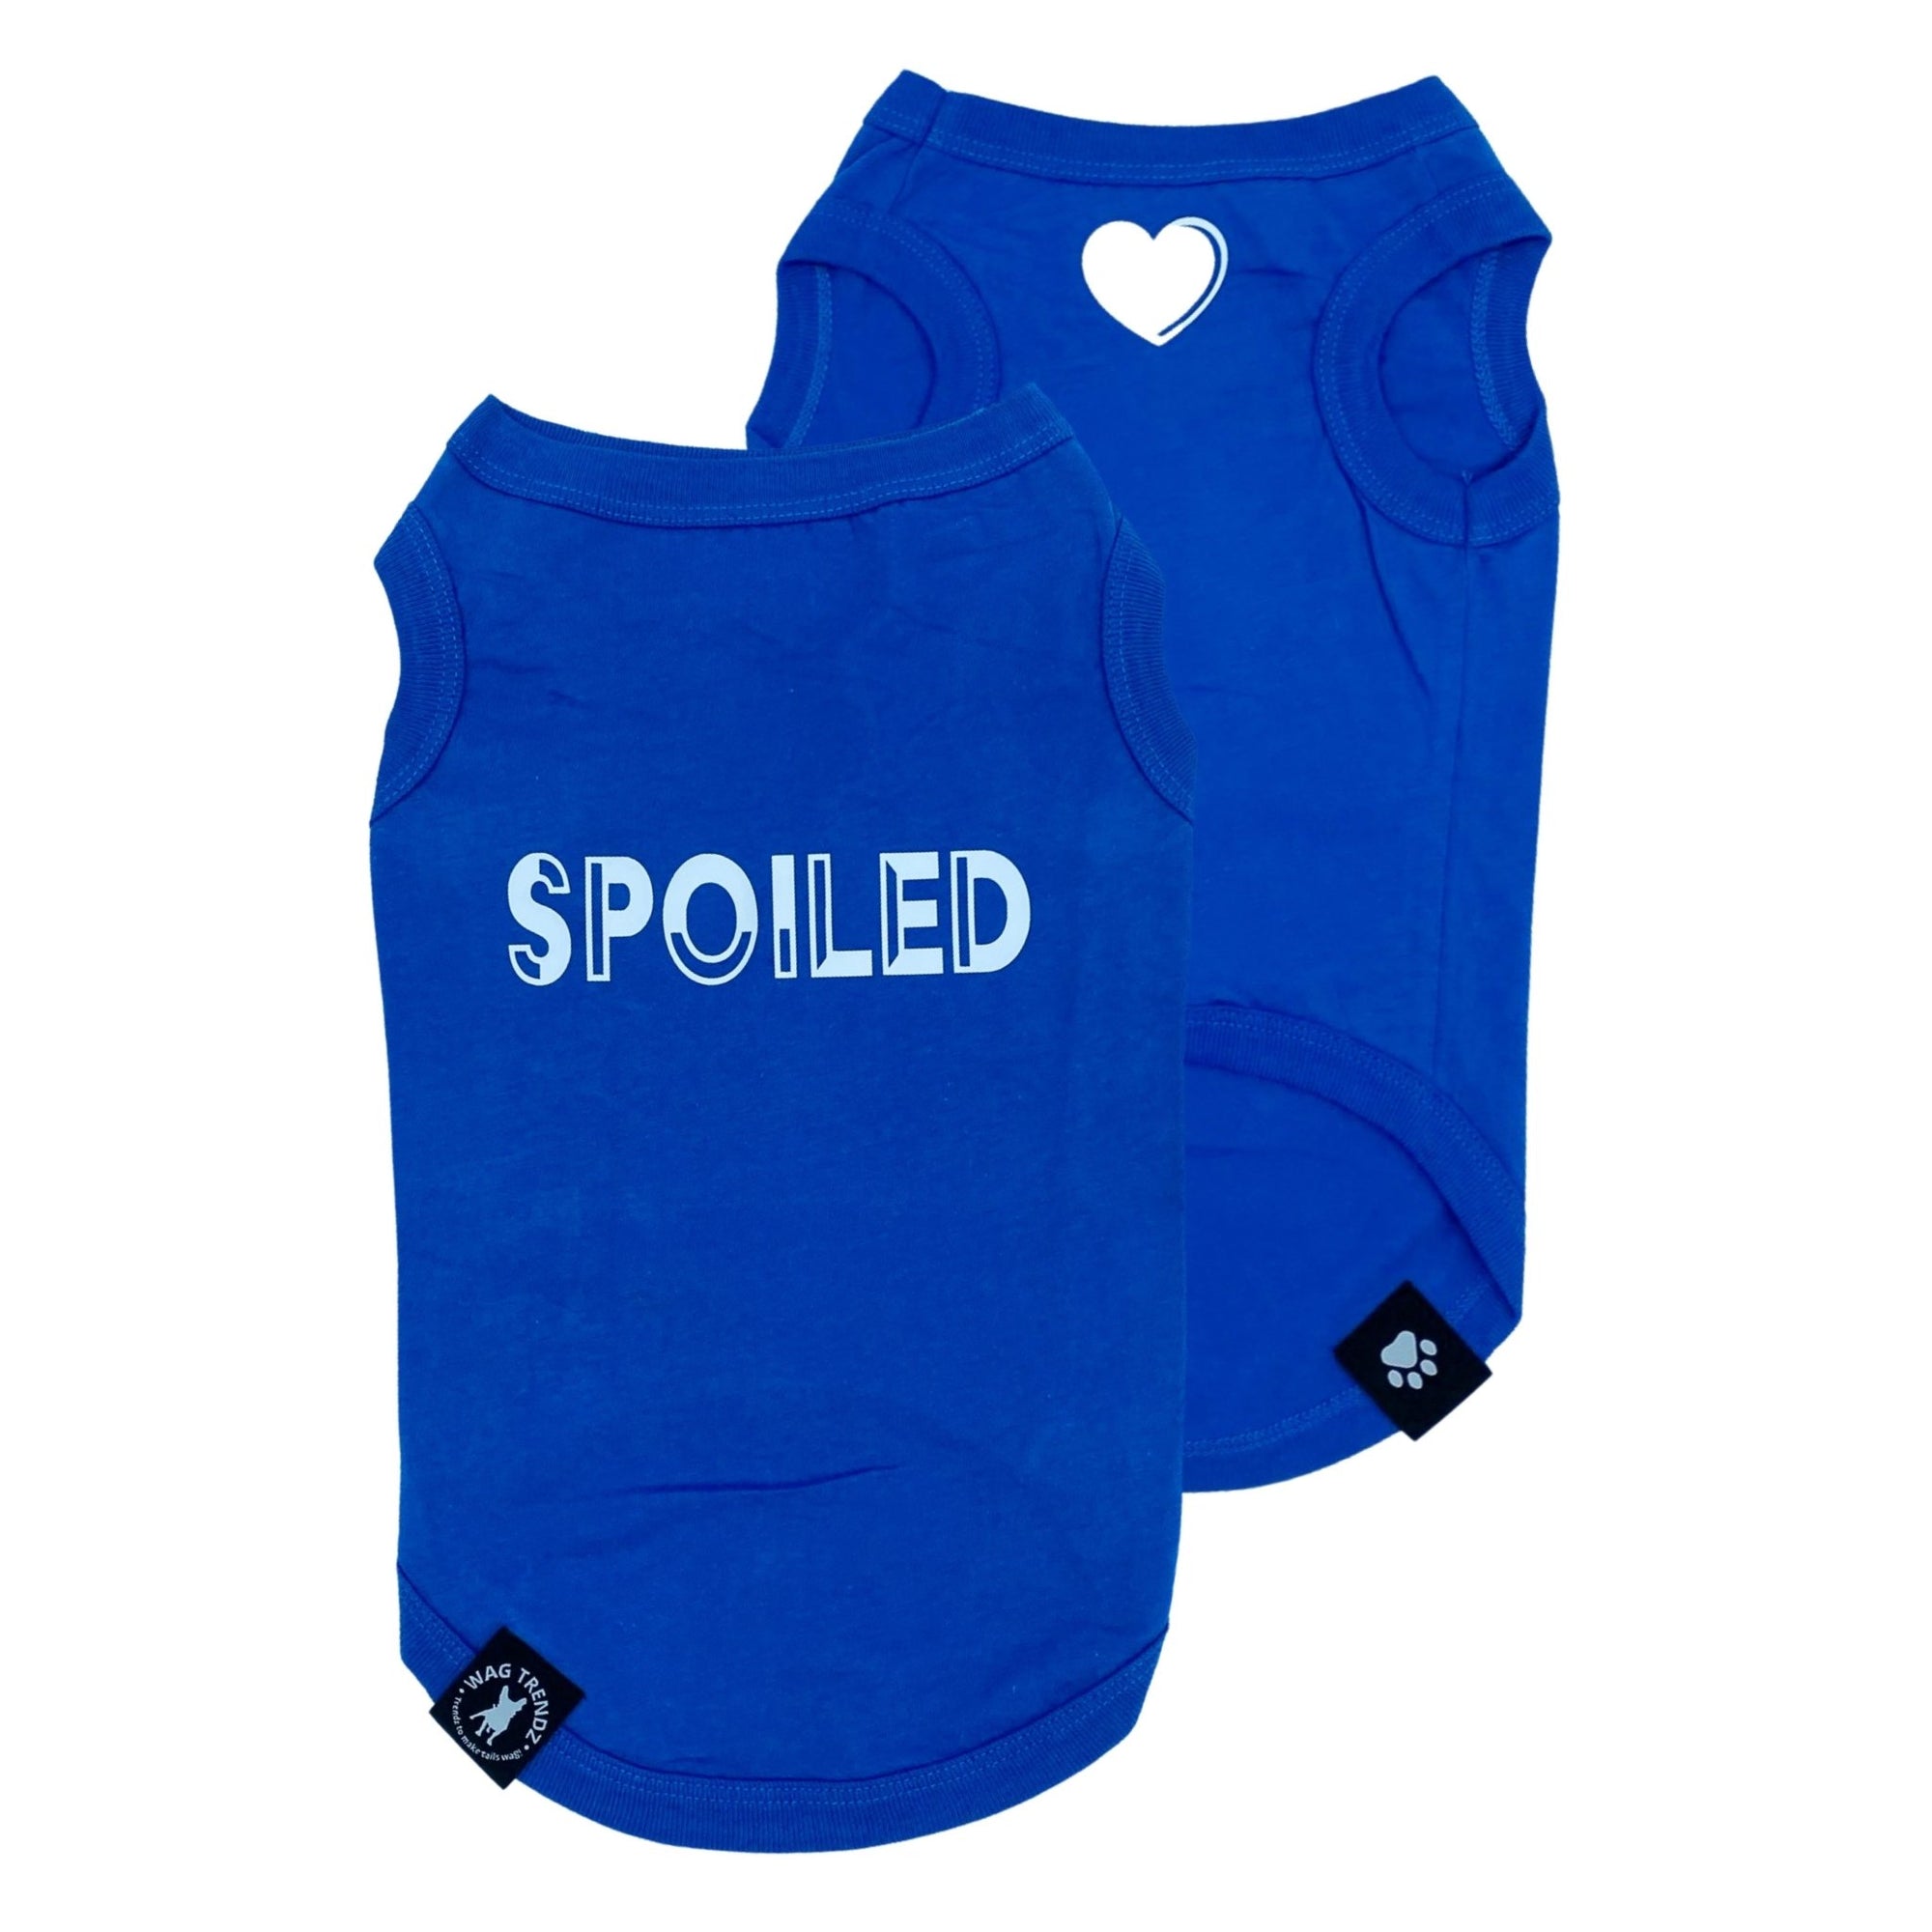 Dog T-Shirt - &quot;Spoiled&quot; - Royal Blue dog t-shirt set - back has SPOILED lettering in white and chest has a solid white heart emoji - against solid white background - Wag Trendz